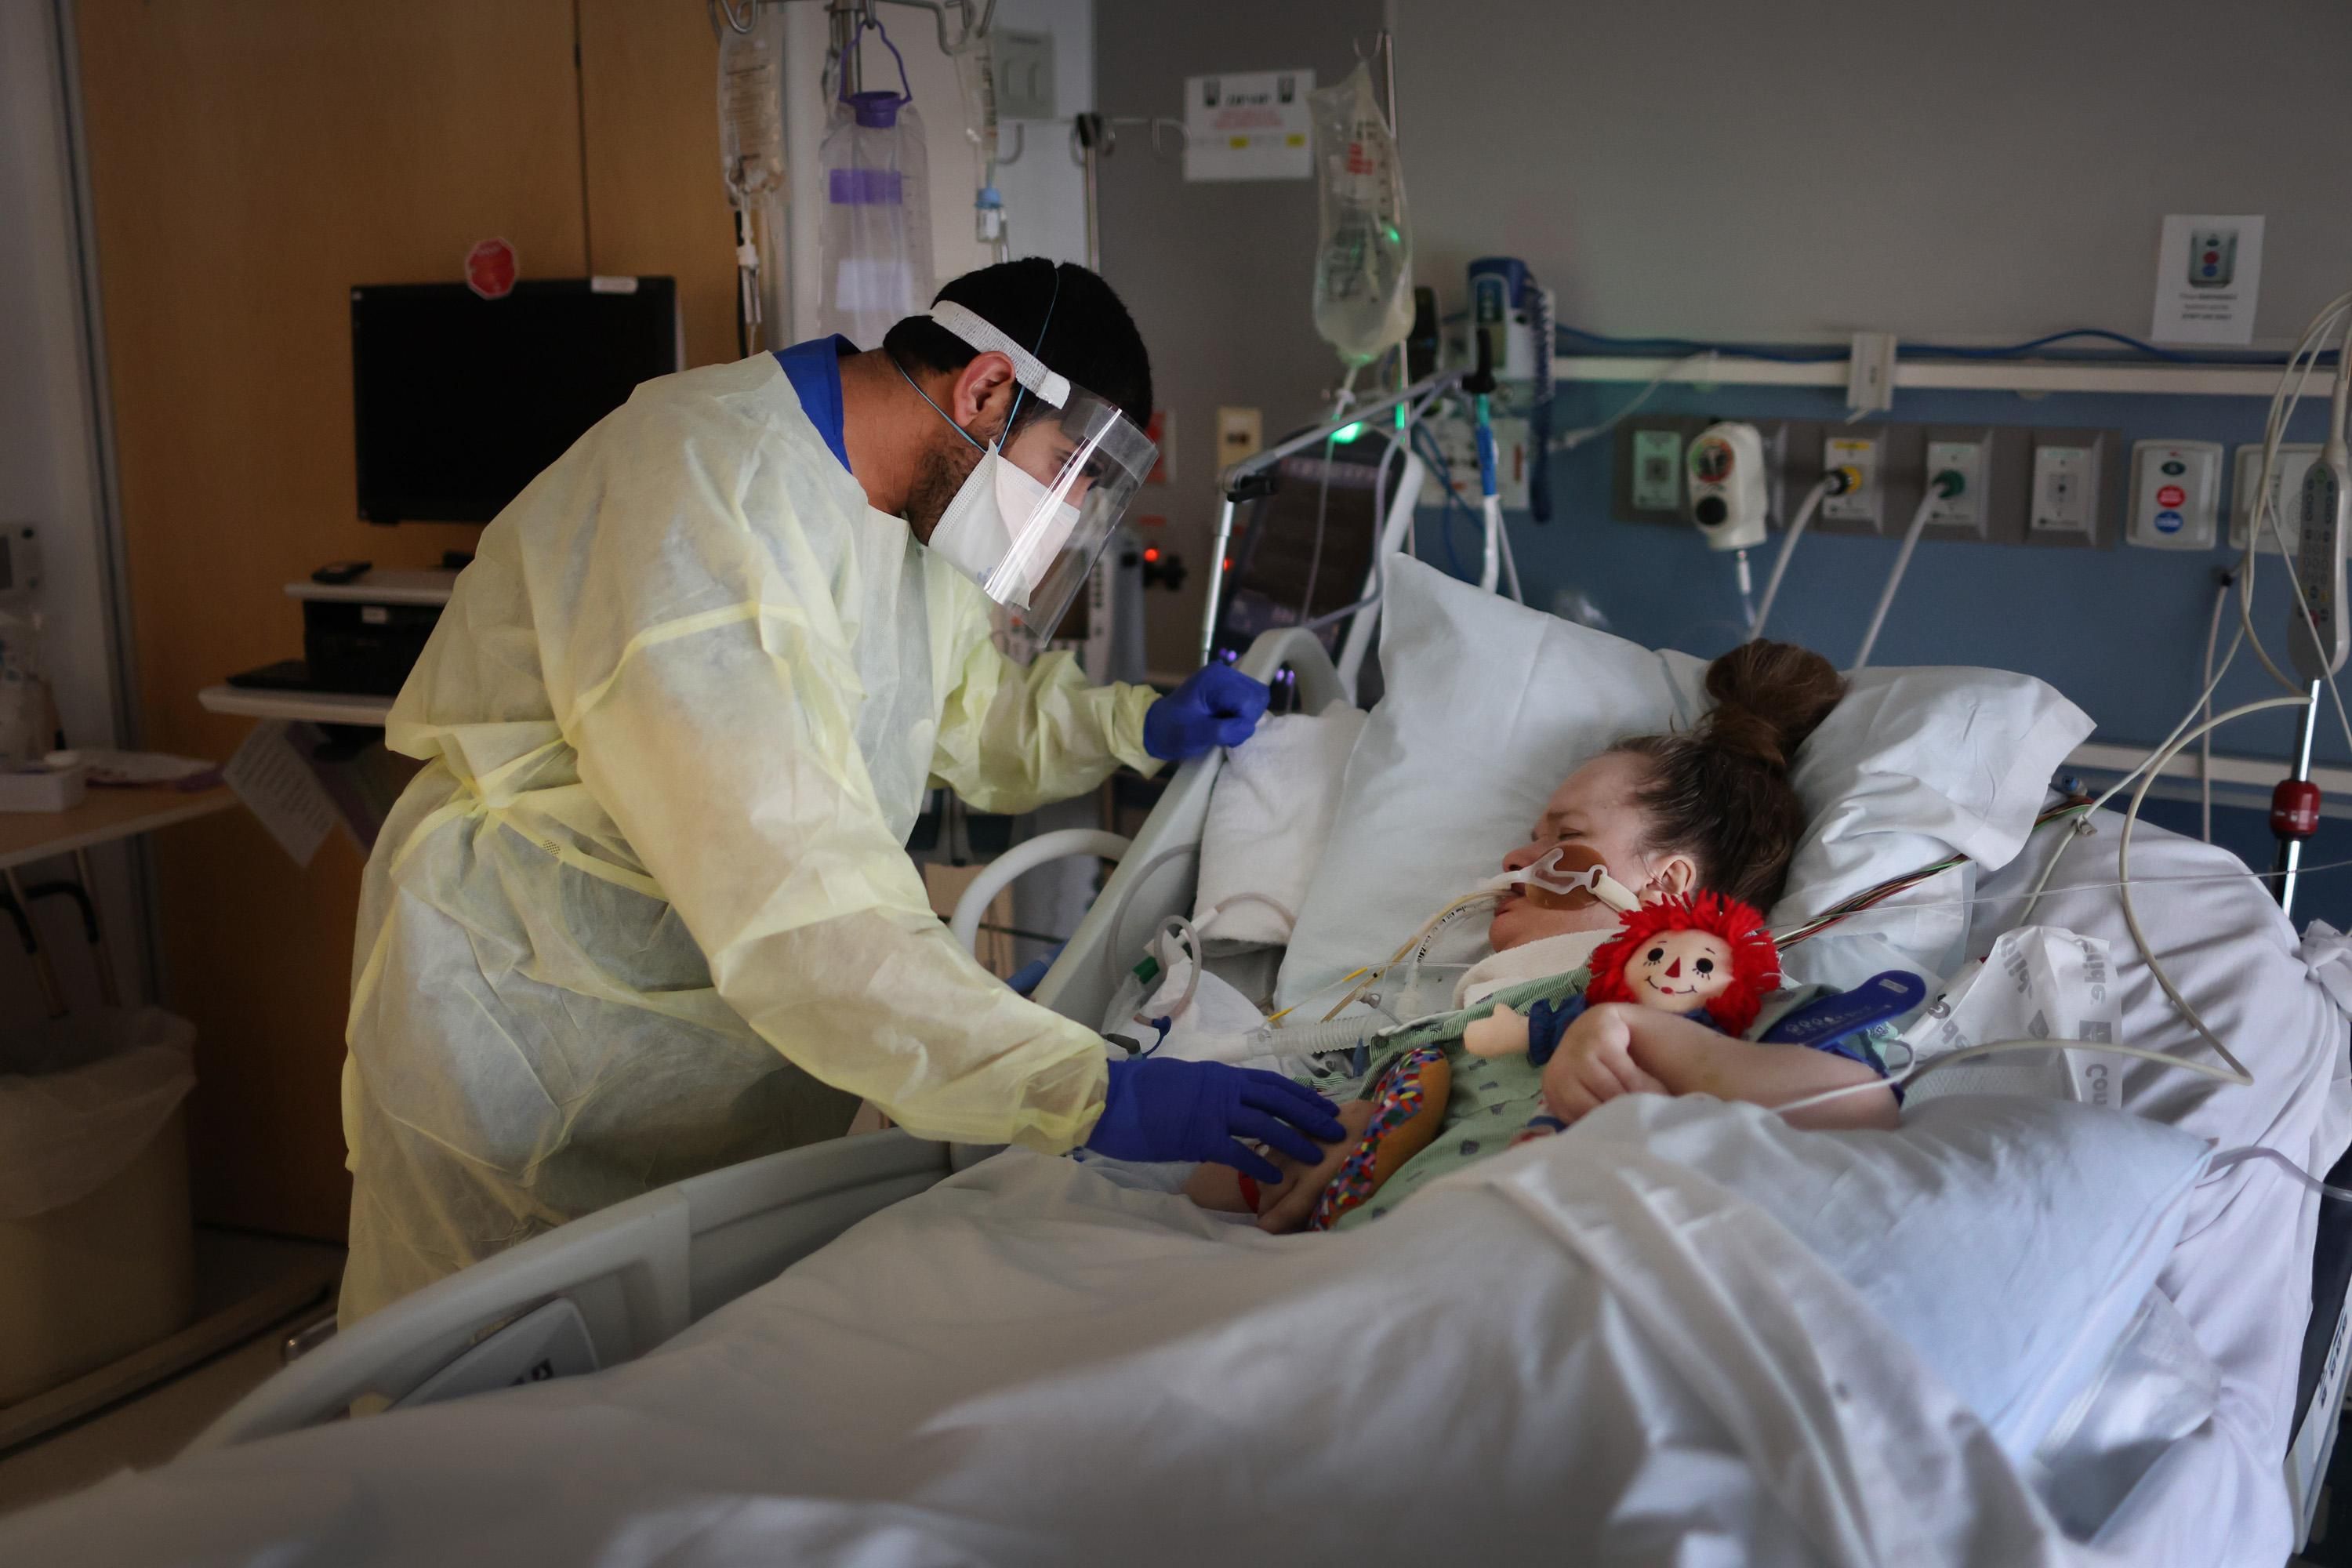 Respiratory Therapist Adel Al Joaid treats Melissa Wartman, a Covid-19 patient, in the ICU at Rush University Medial Center on January 31, 2022 in Chicago. (Photo: Scott Olson/Getty Images)